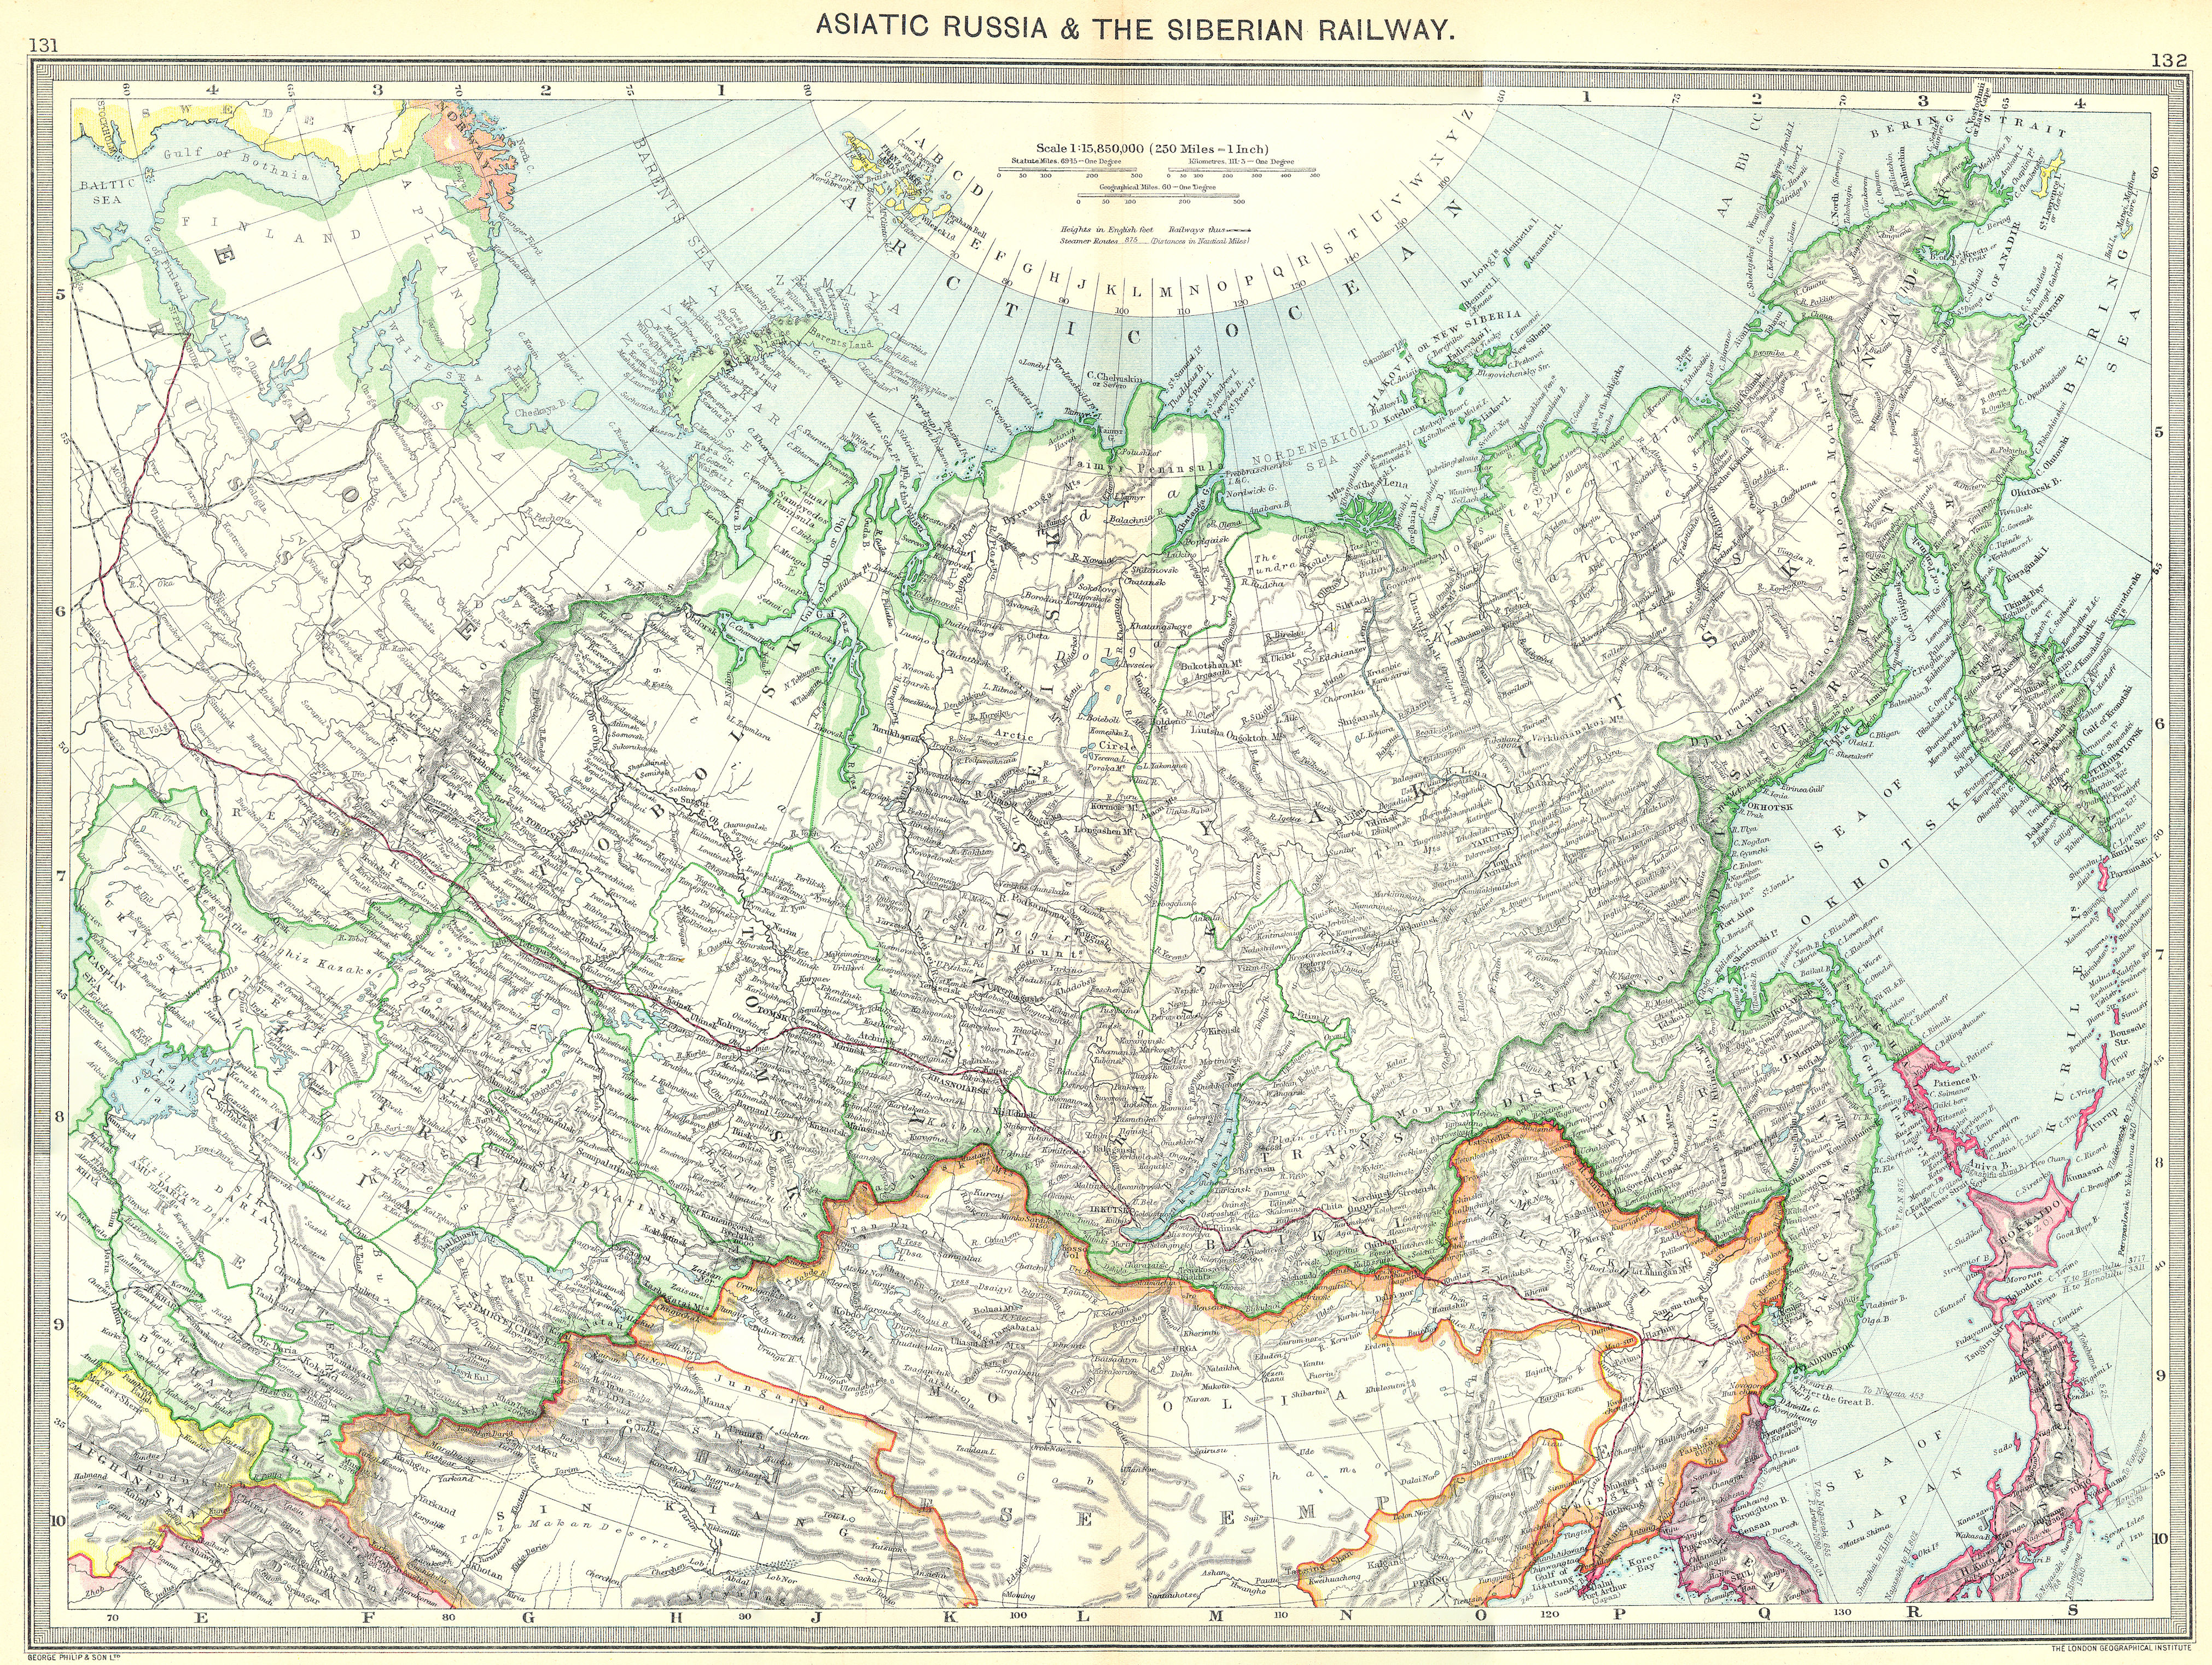 Associate Product RUSSIA. Asiatic Russia and the Siberian Railway 1907 old antique map chart